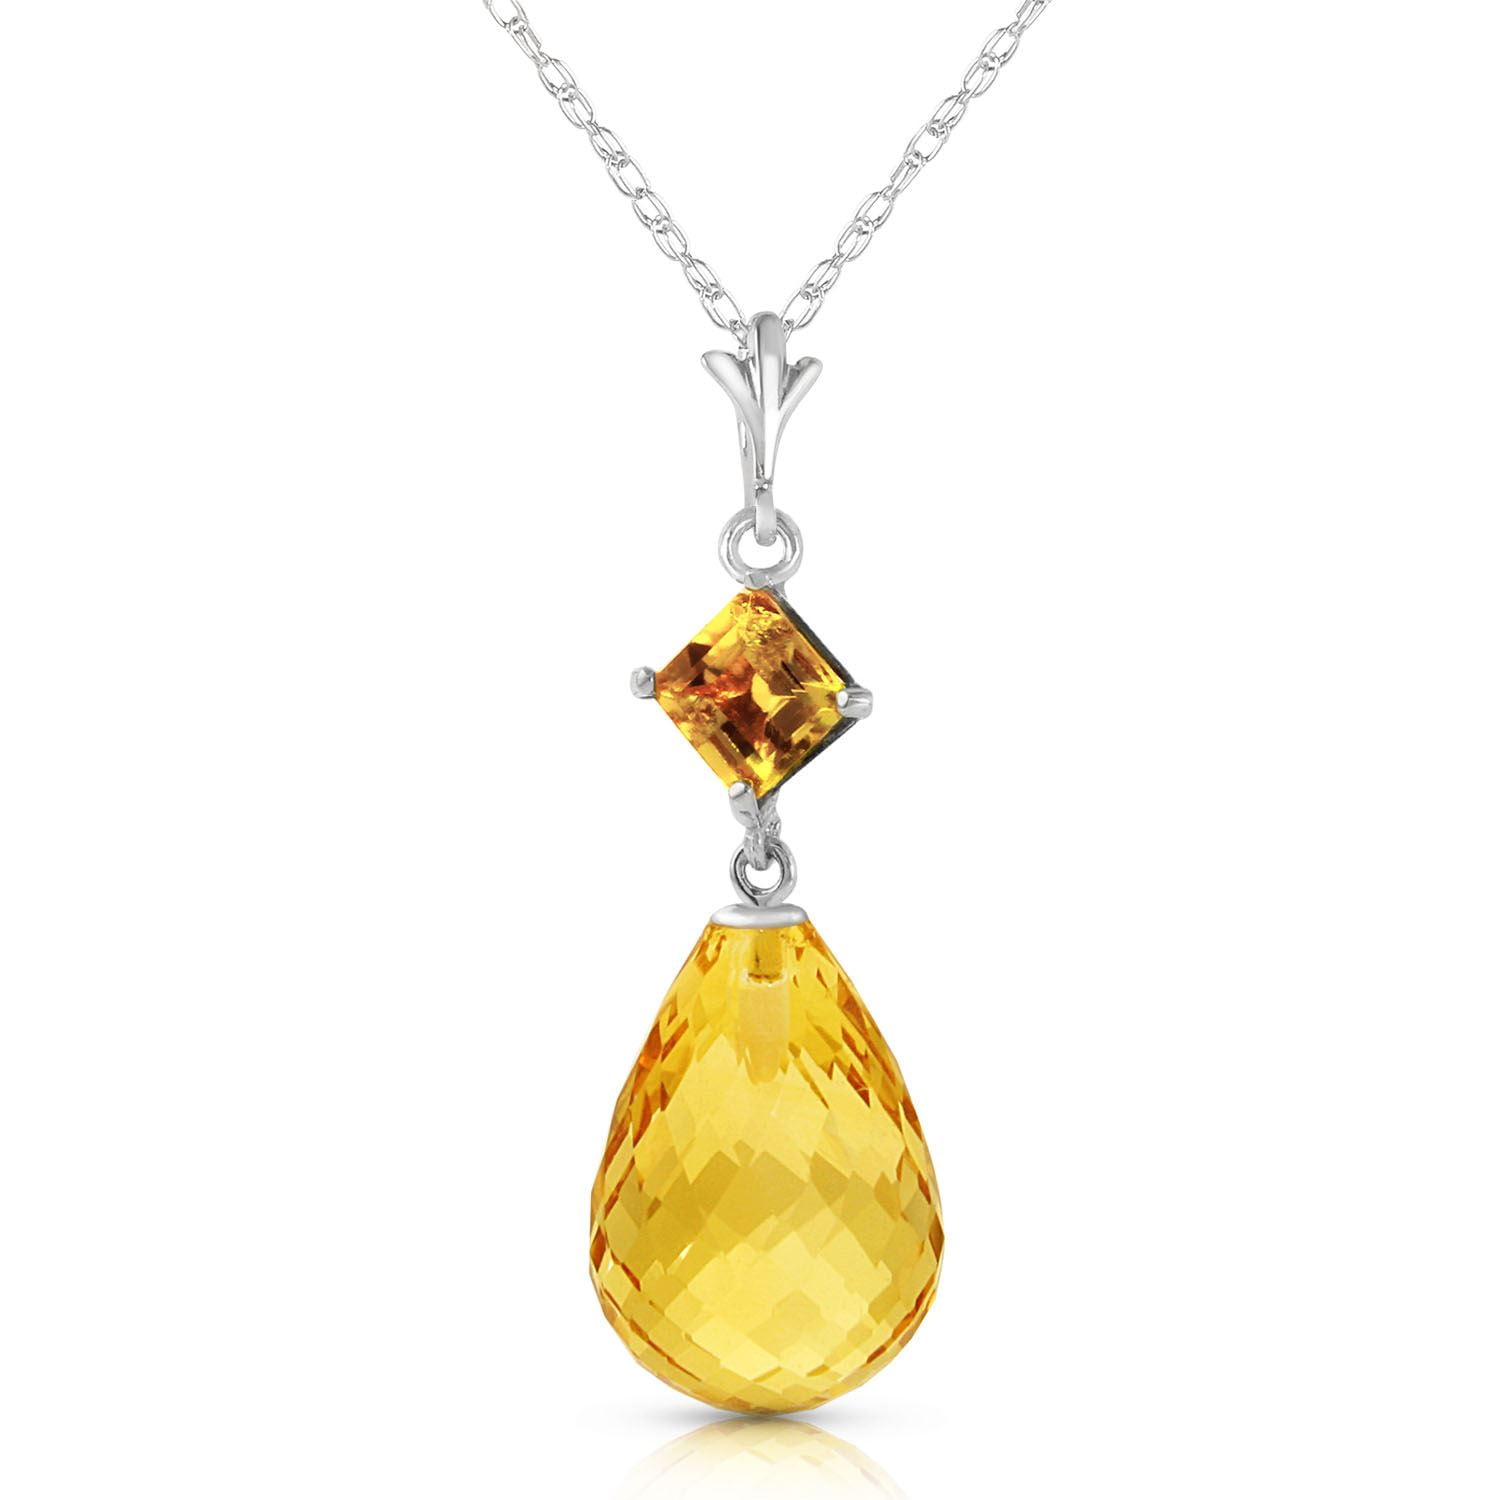 ALARRI 5.5 CTW 14K Solid White Gold Accentuate Citrine Necklace with 20 Inch Chain Length